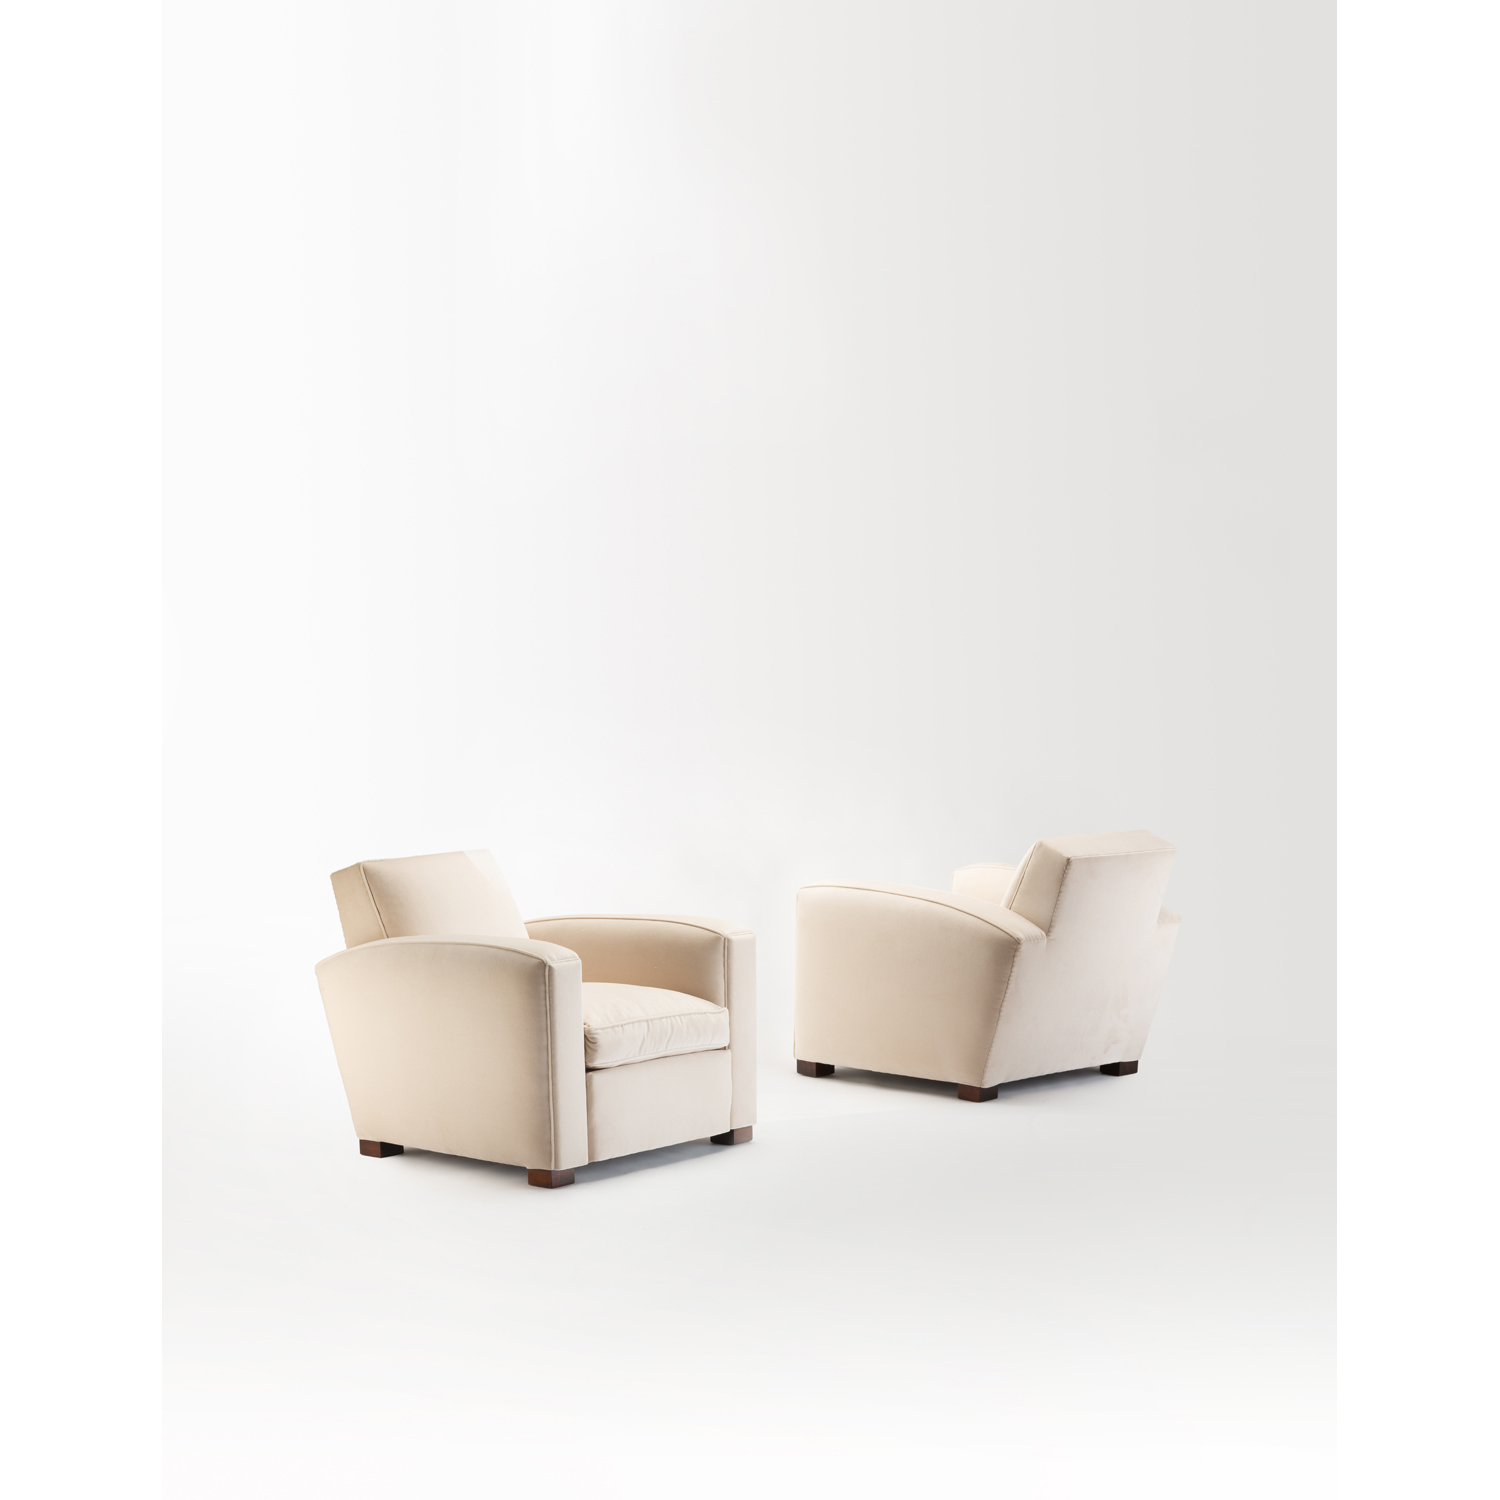 Jacques Adnet (1900-1984) Pair of Club armchairs